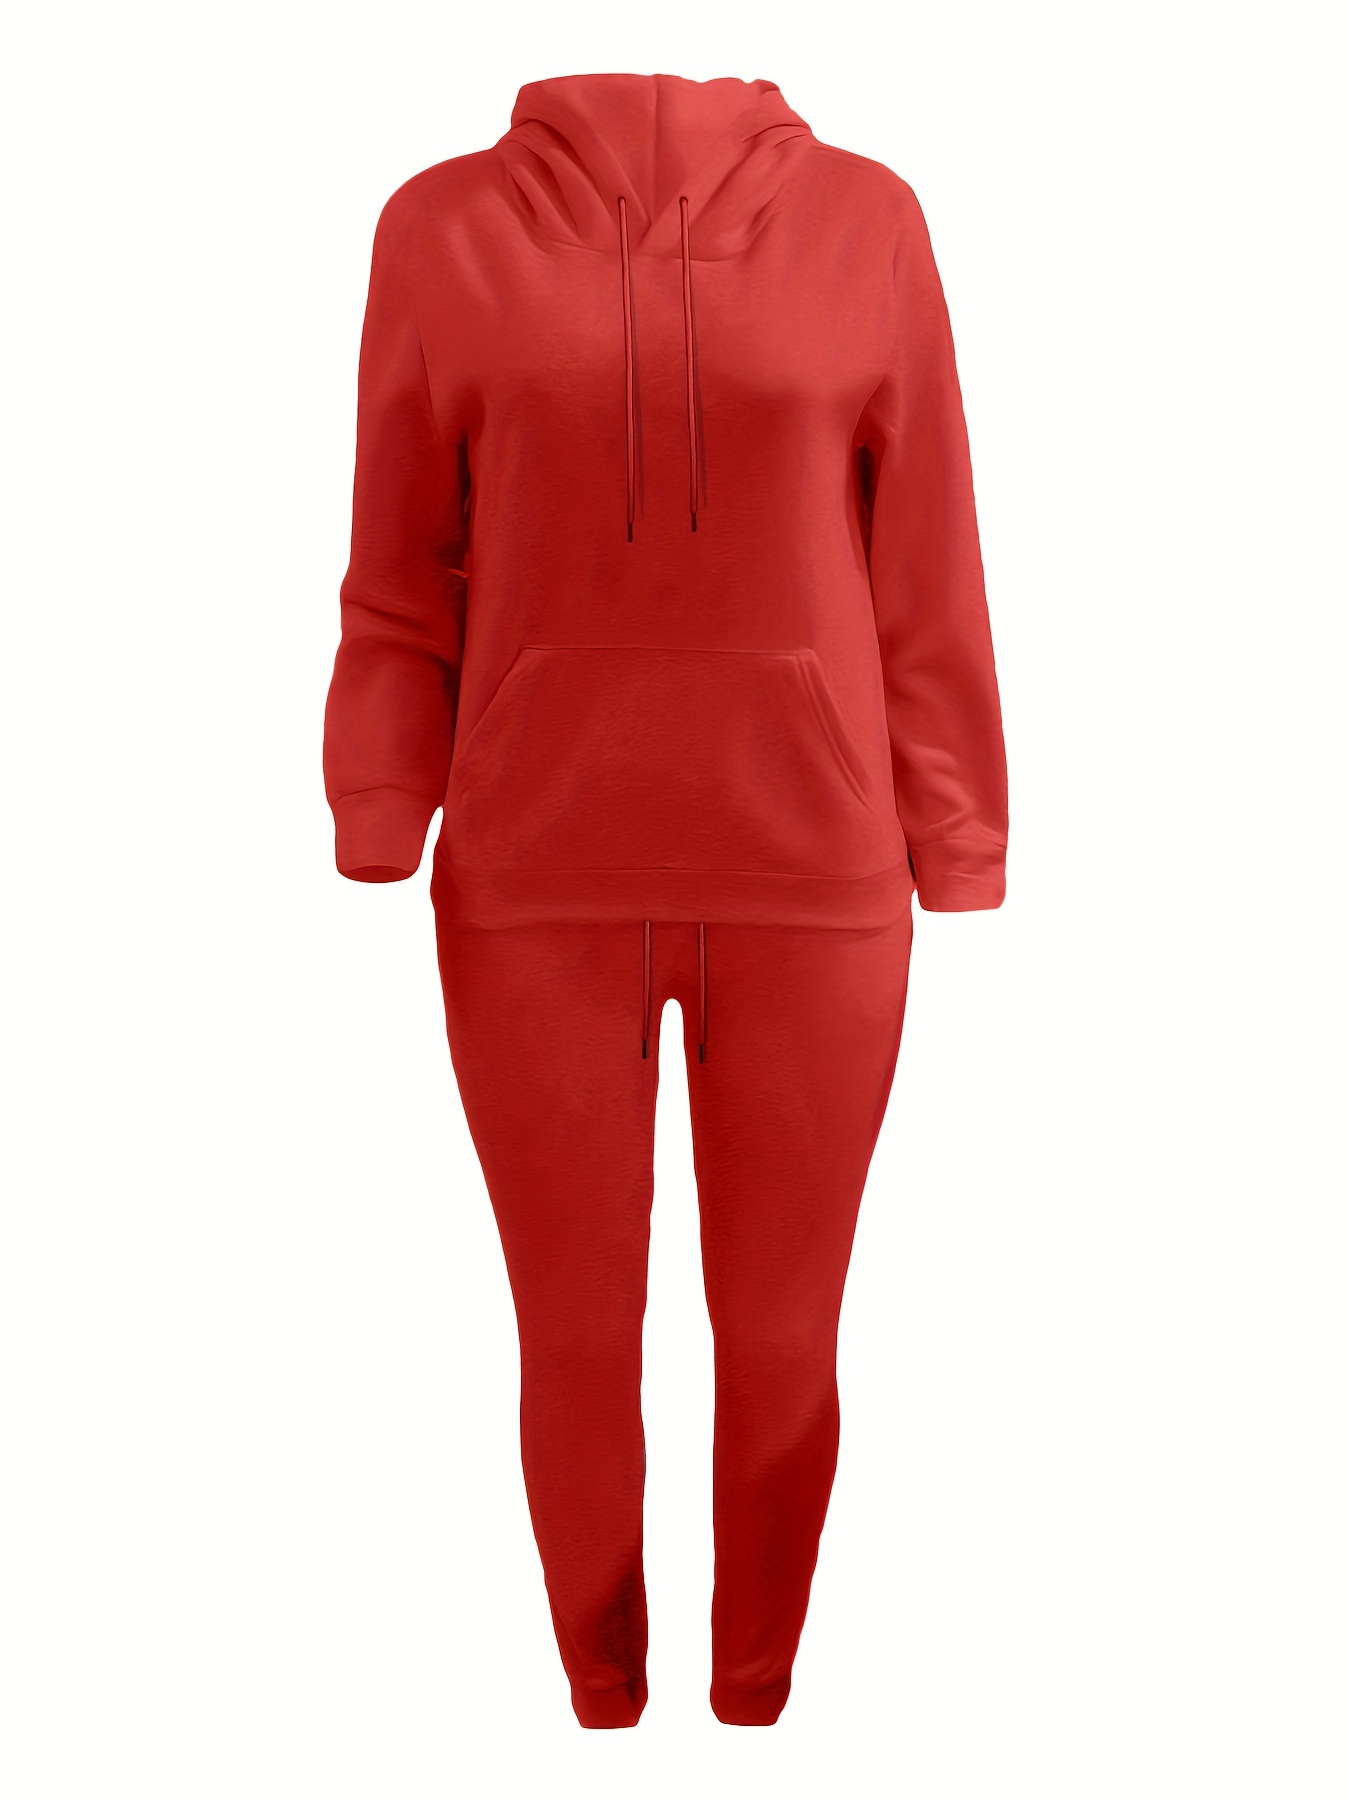 Womens Warm Two Piece Tracksuit Set With Pink Hoodie Womens And Pants Top  And Bottom Clothing For Ladies From Jiehan_shop, $17.2